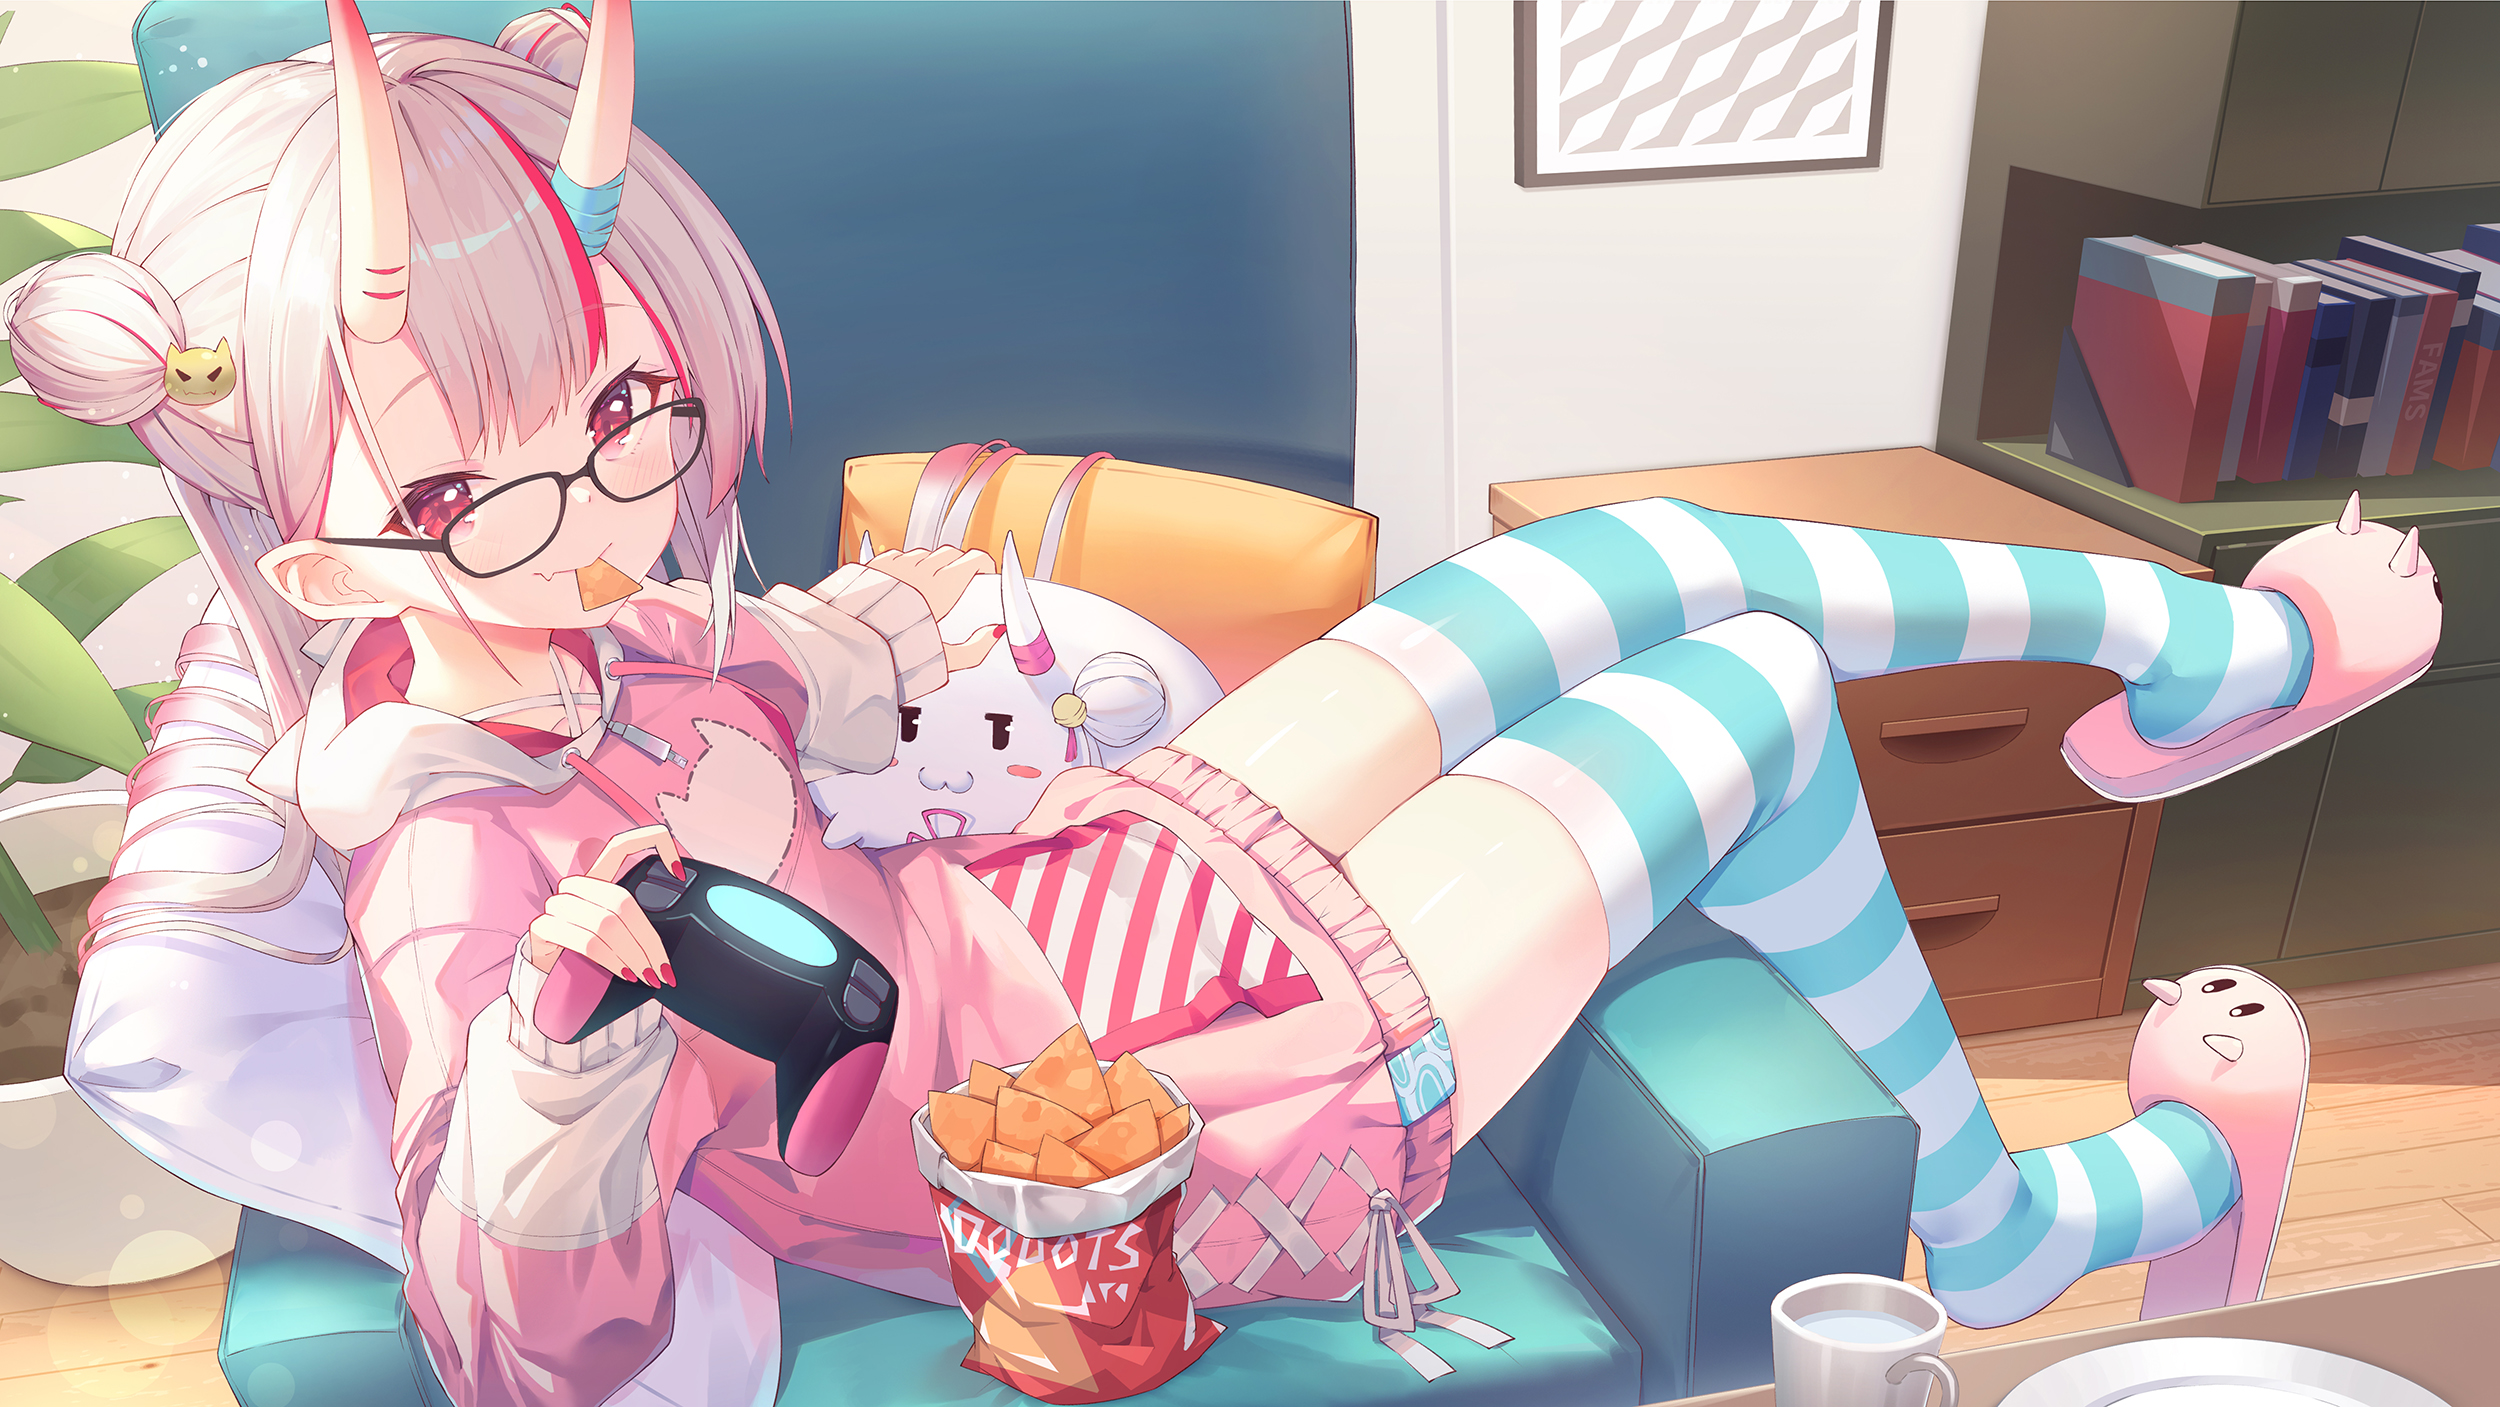 Anime 2500x1407 anime anime girls Hololive Virtual Youtuber Nakiri Ayame glasses horns controllers stockings striped stockings slippers lying on couch